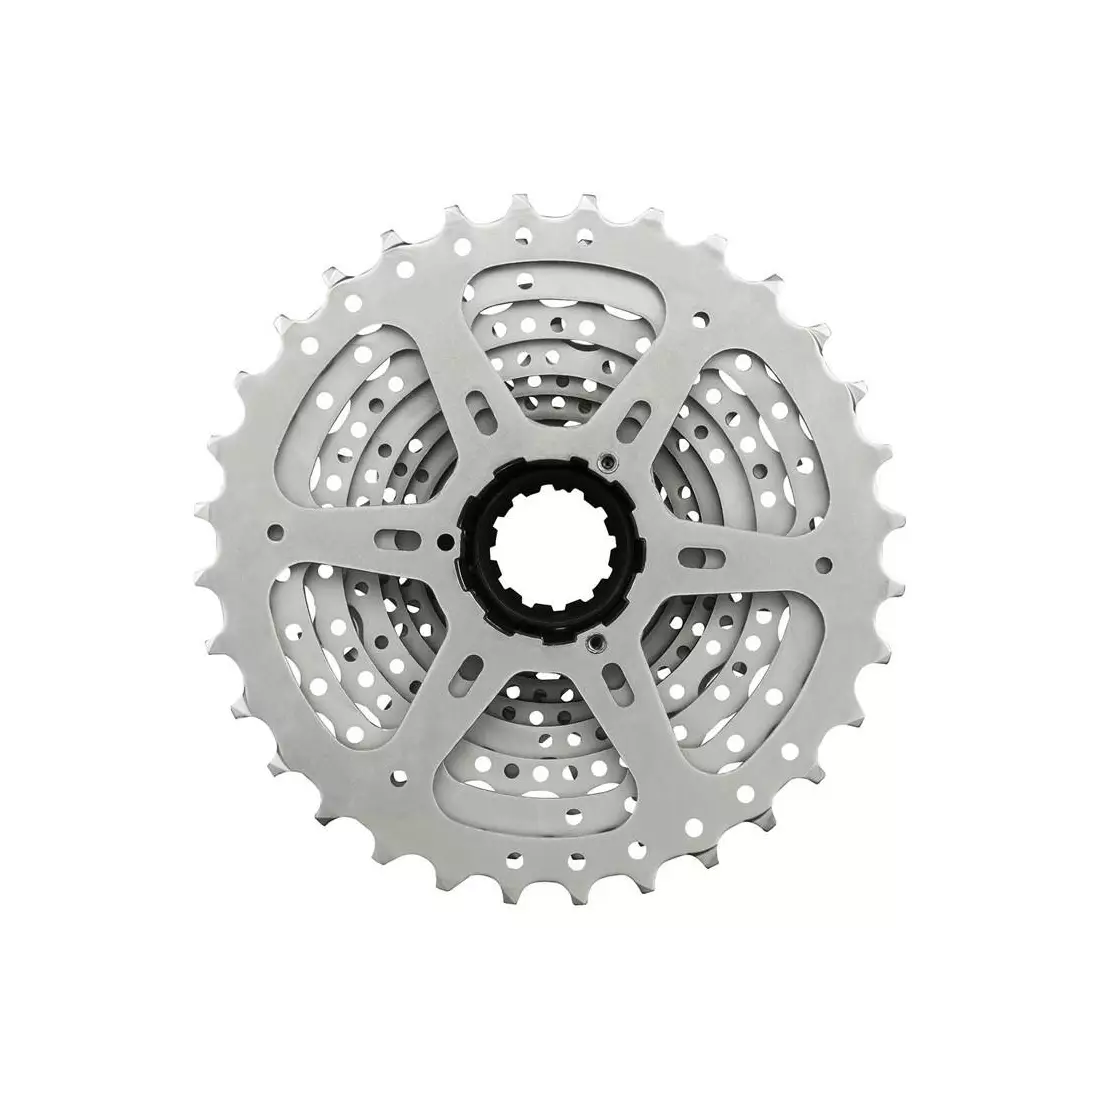 SHIMANO CS-HG201 bicycle cassette 9-speed 11-34T